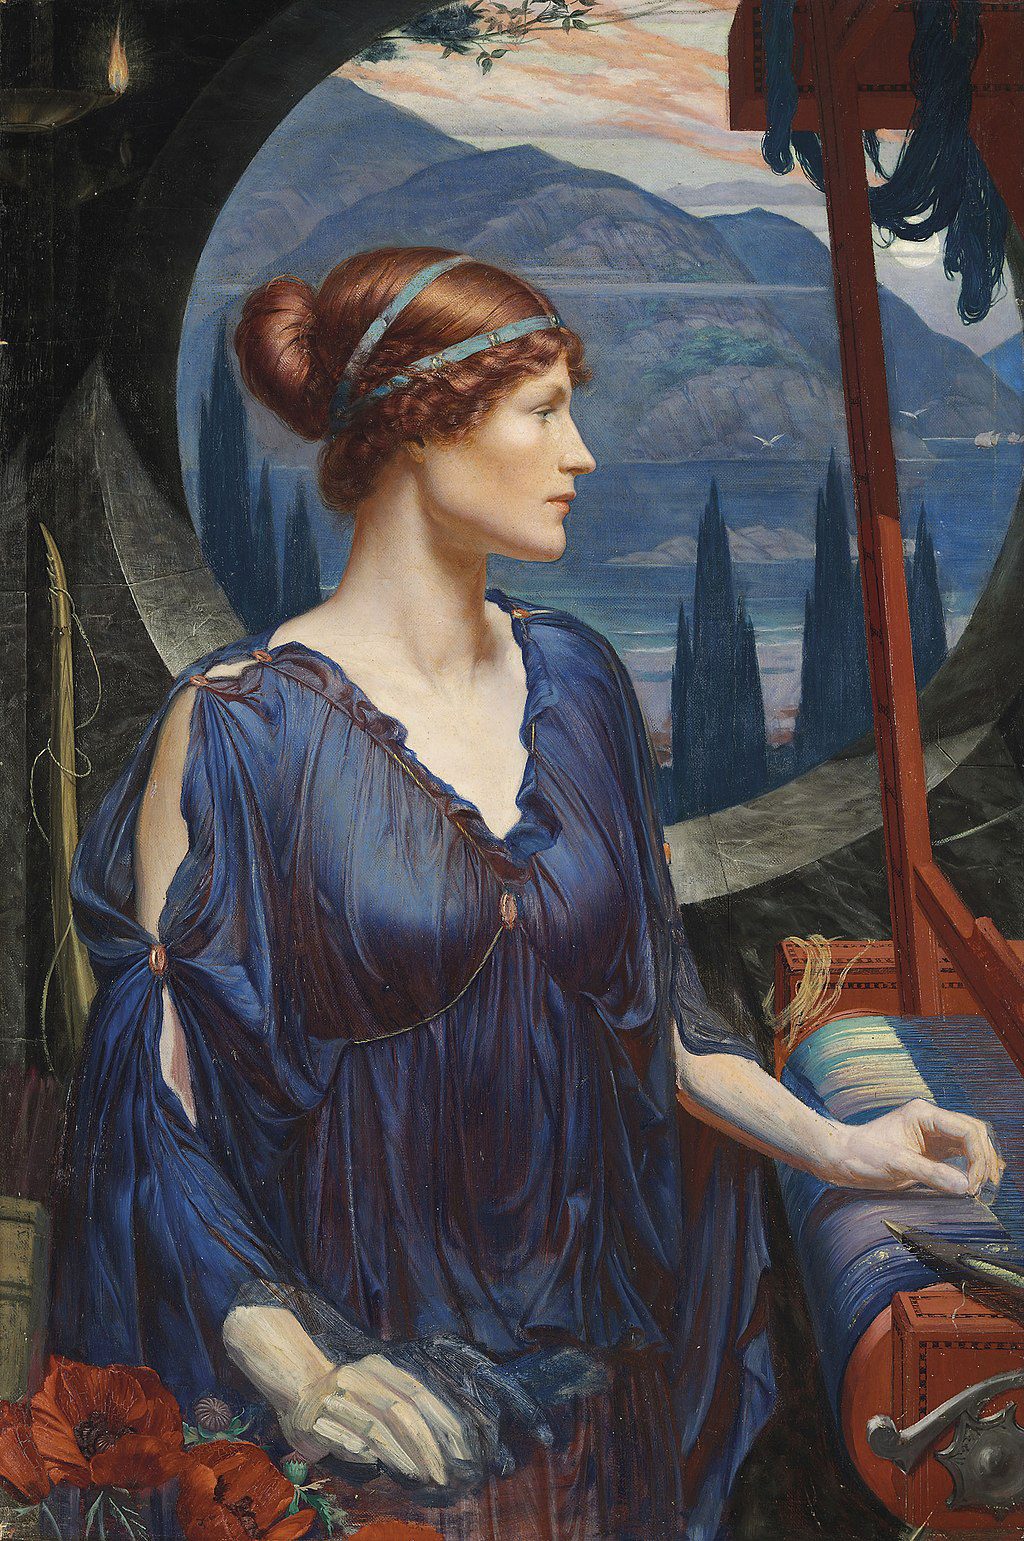 Penelope at Her Loom by Sidney Harold Meteyard. Penelope stares contemplatively into the distance.